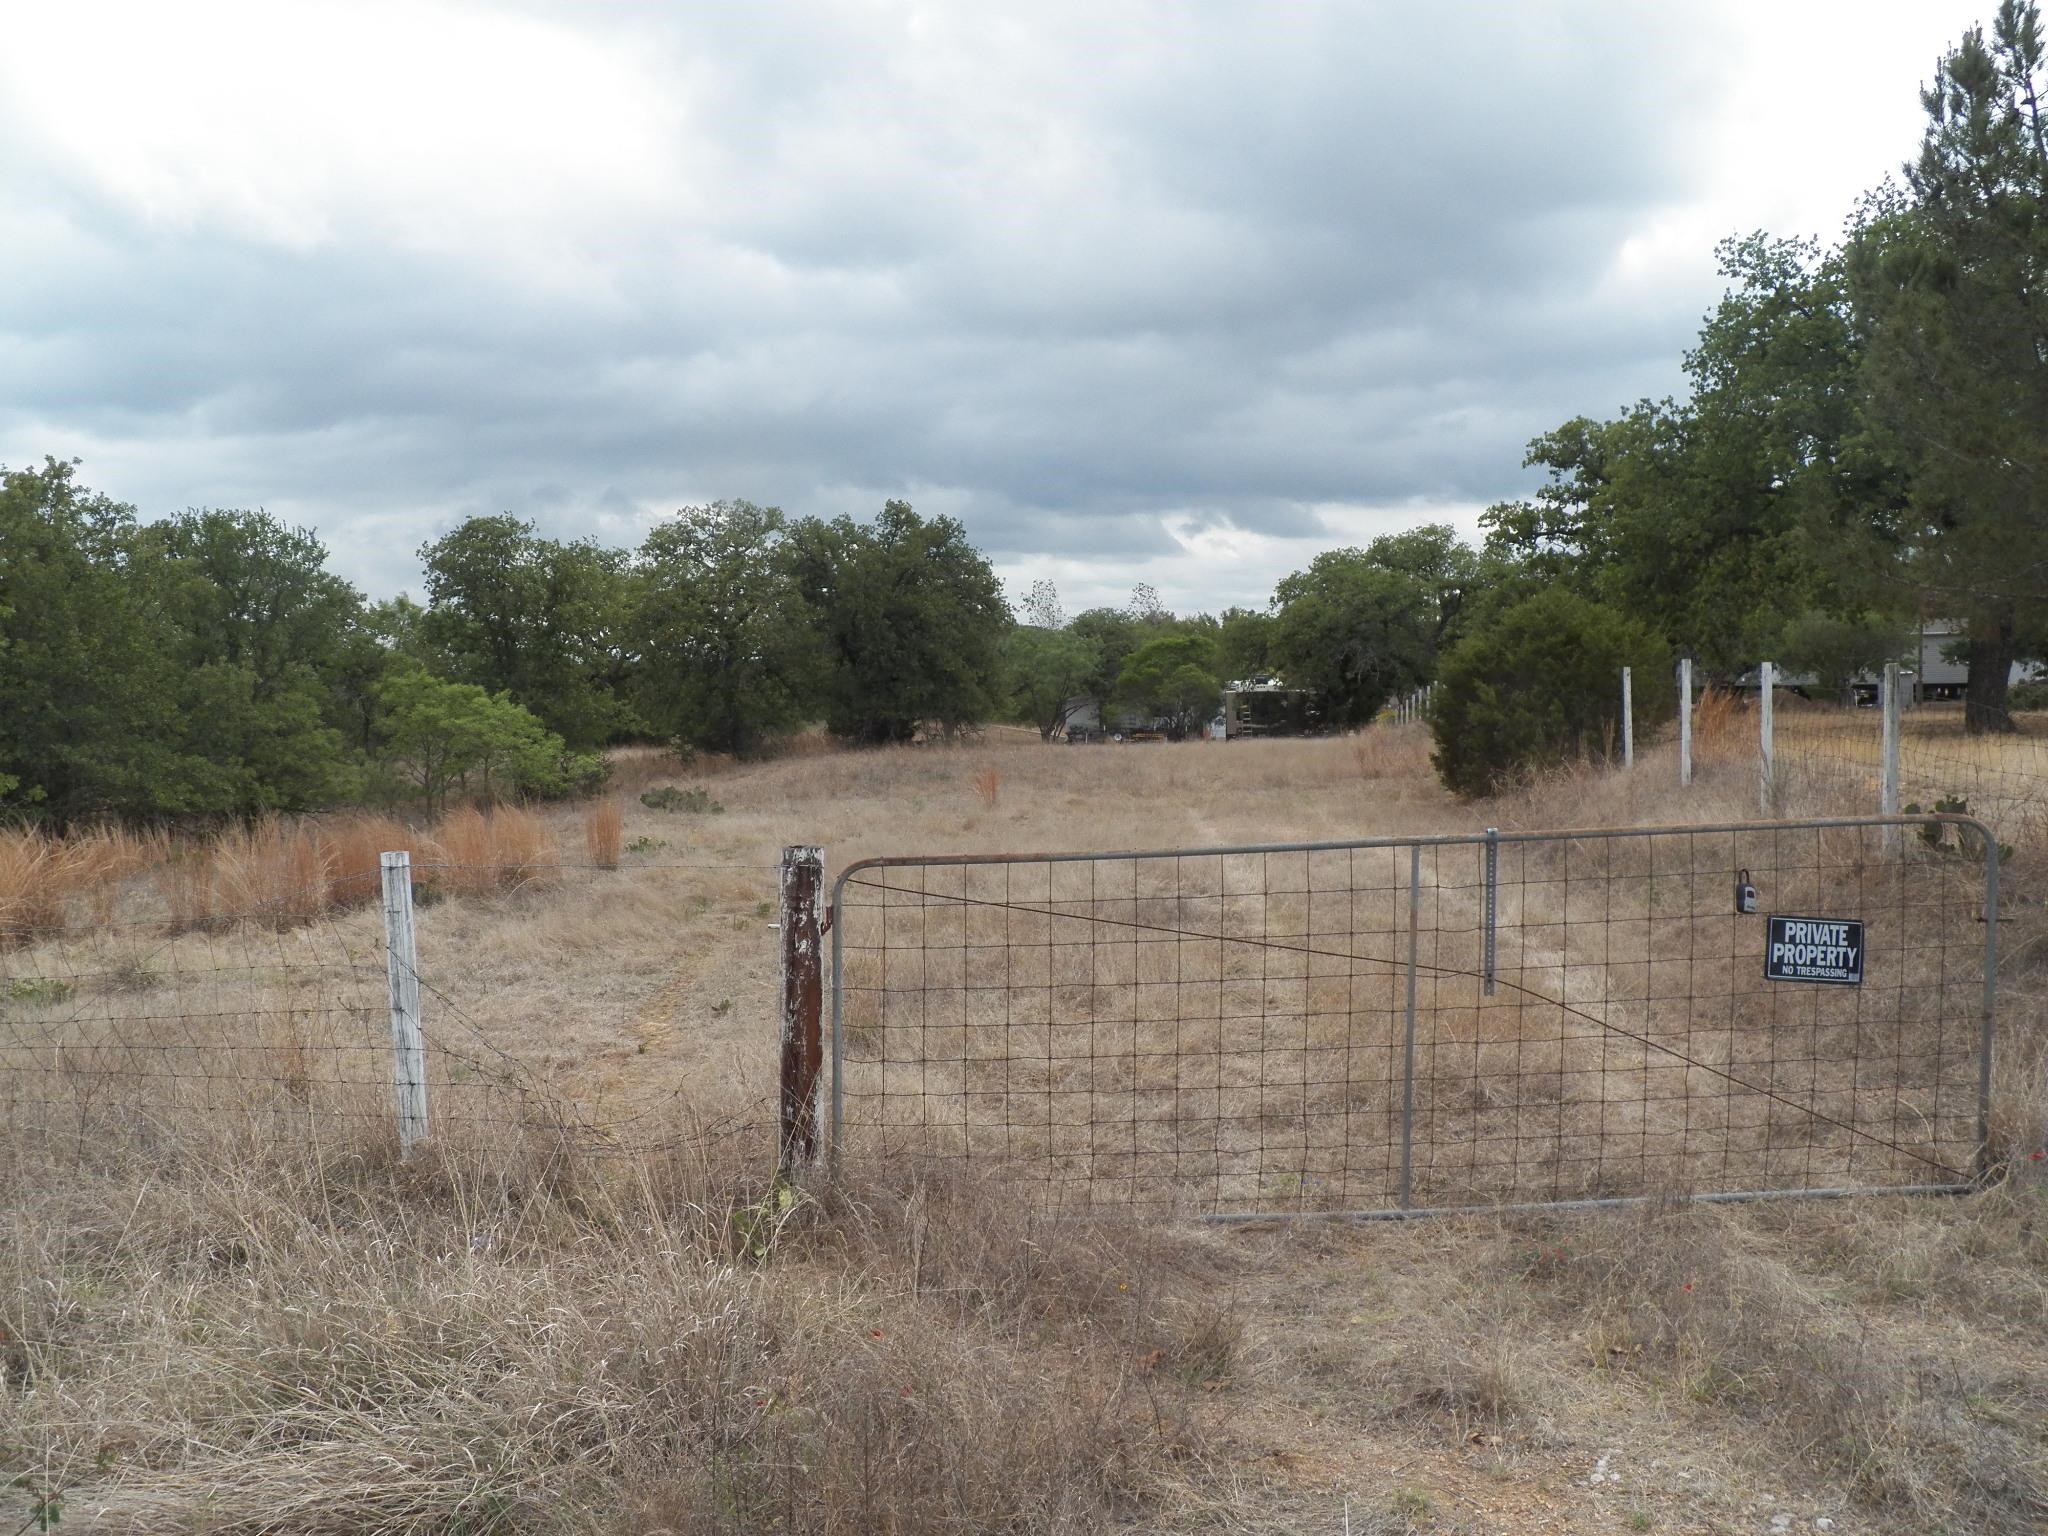 partially flat lot in good area. Plenty of room to build on the flat part of lot. Has wet weather creek on one side.